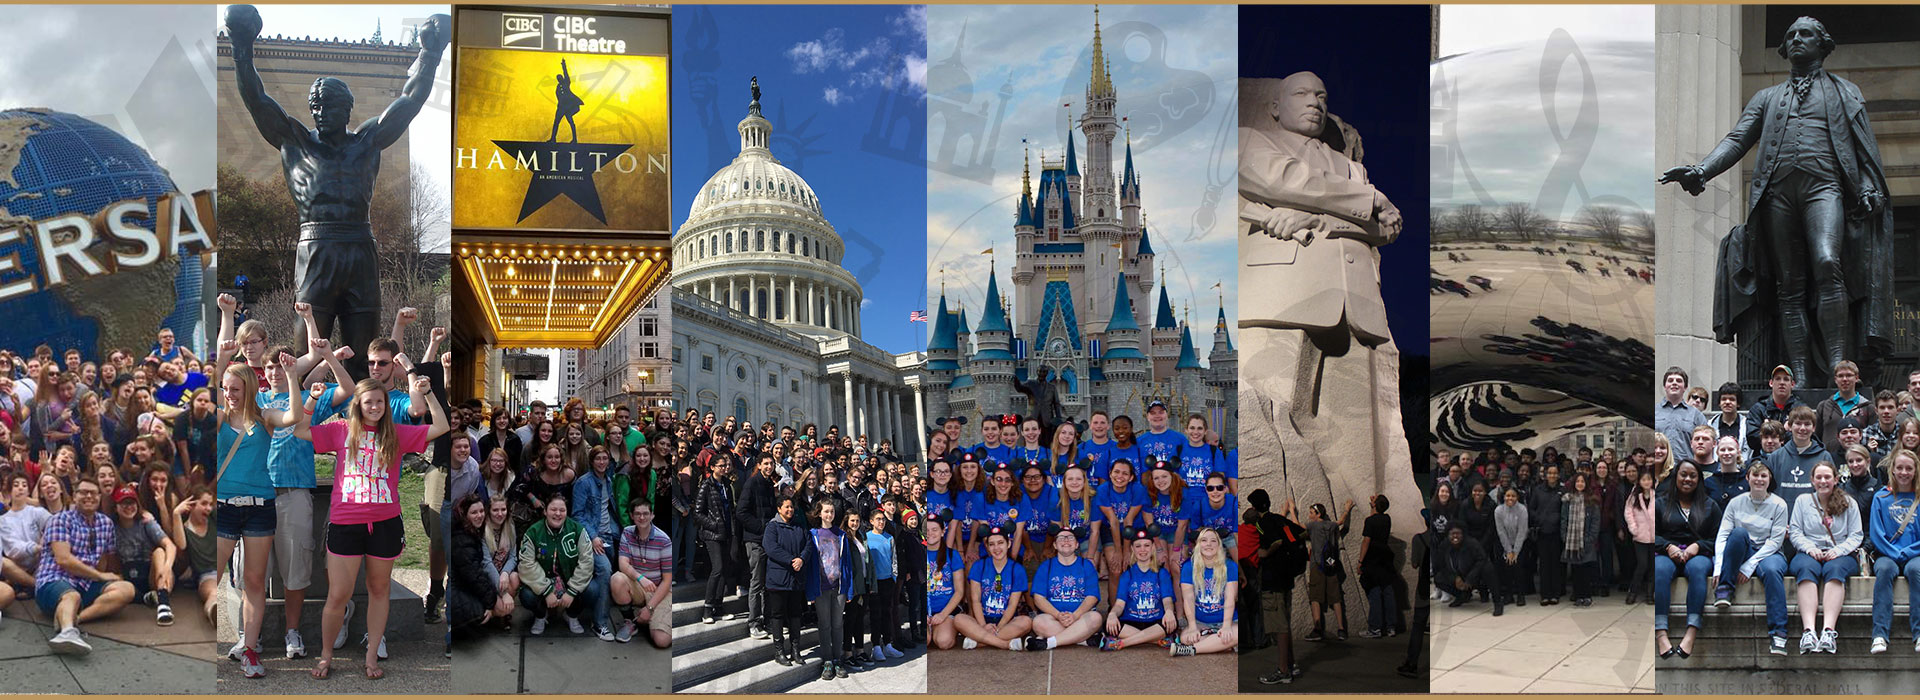 Travel opportunities designed to inspire and enrich educational groups.